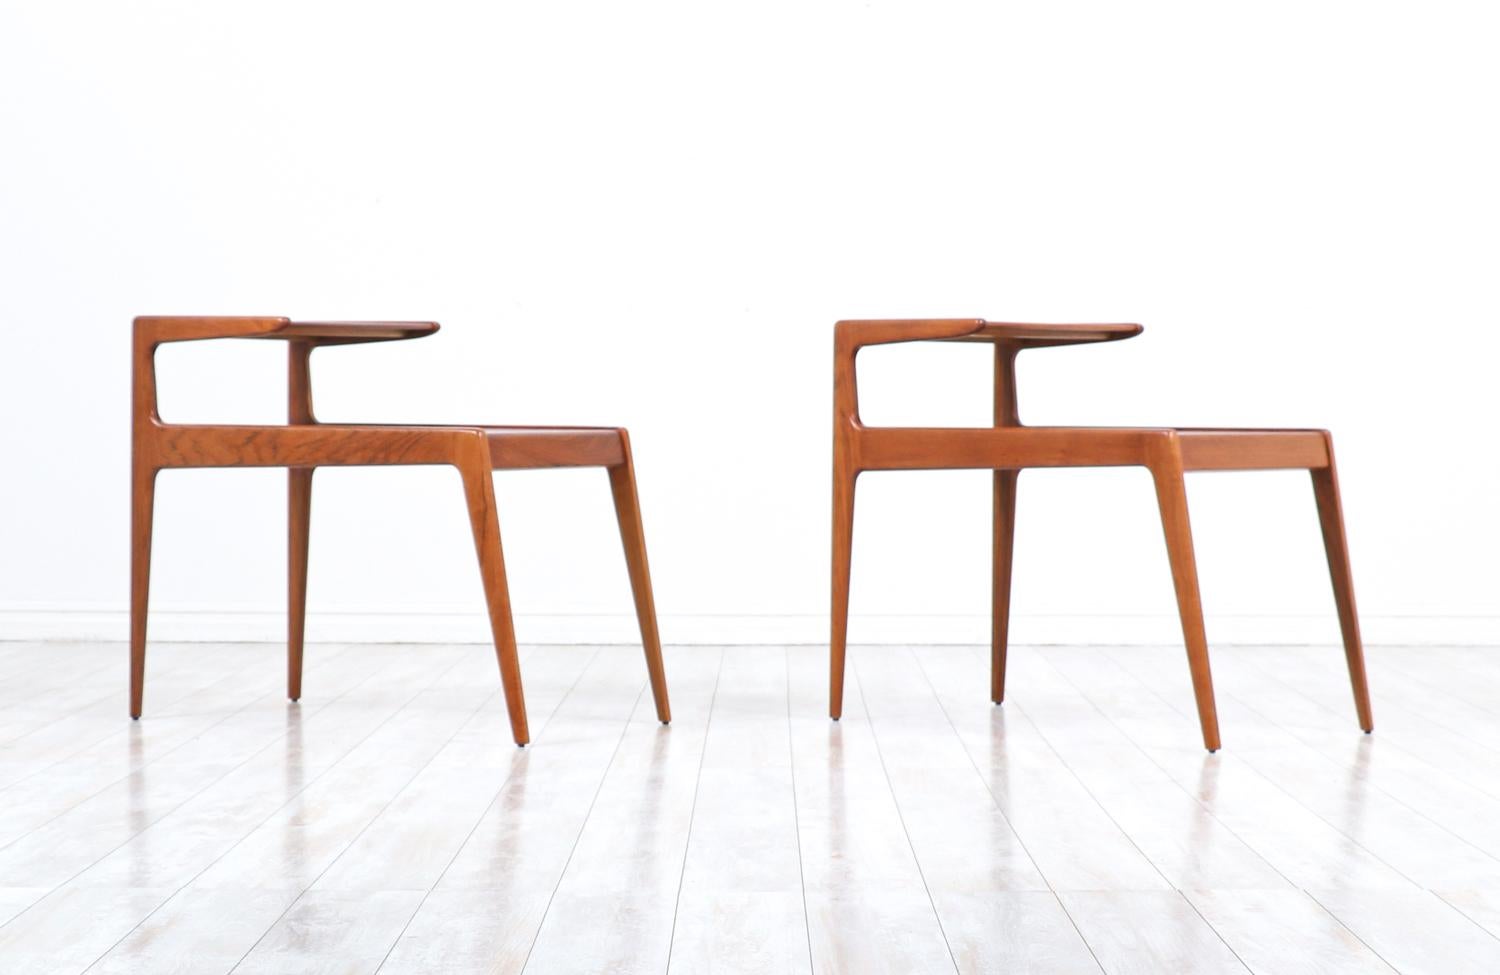 Pair of Danish Modern side tables designed by Kurt Østervig and manufactured by Jason Møbler in Denmark circa 1950’s. This set of tables with two tiers and sharp, clean lines are a great example of well-crafted minimalistic design. Their versatility